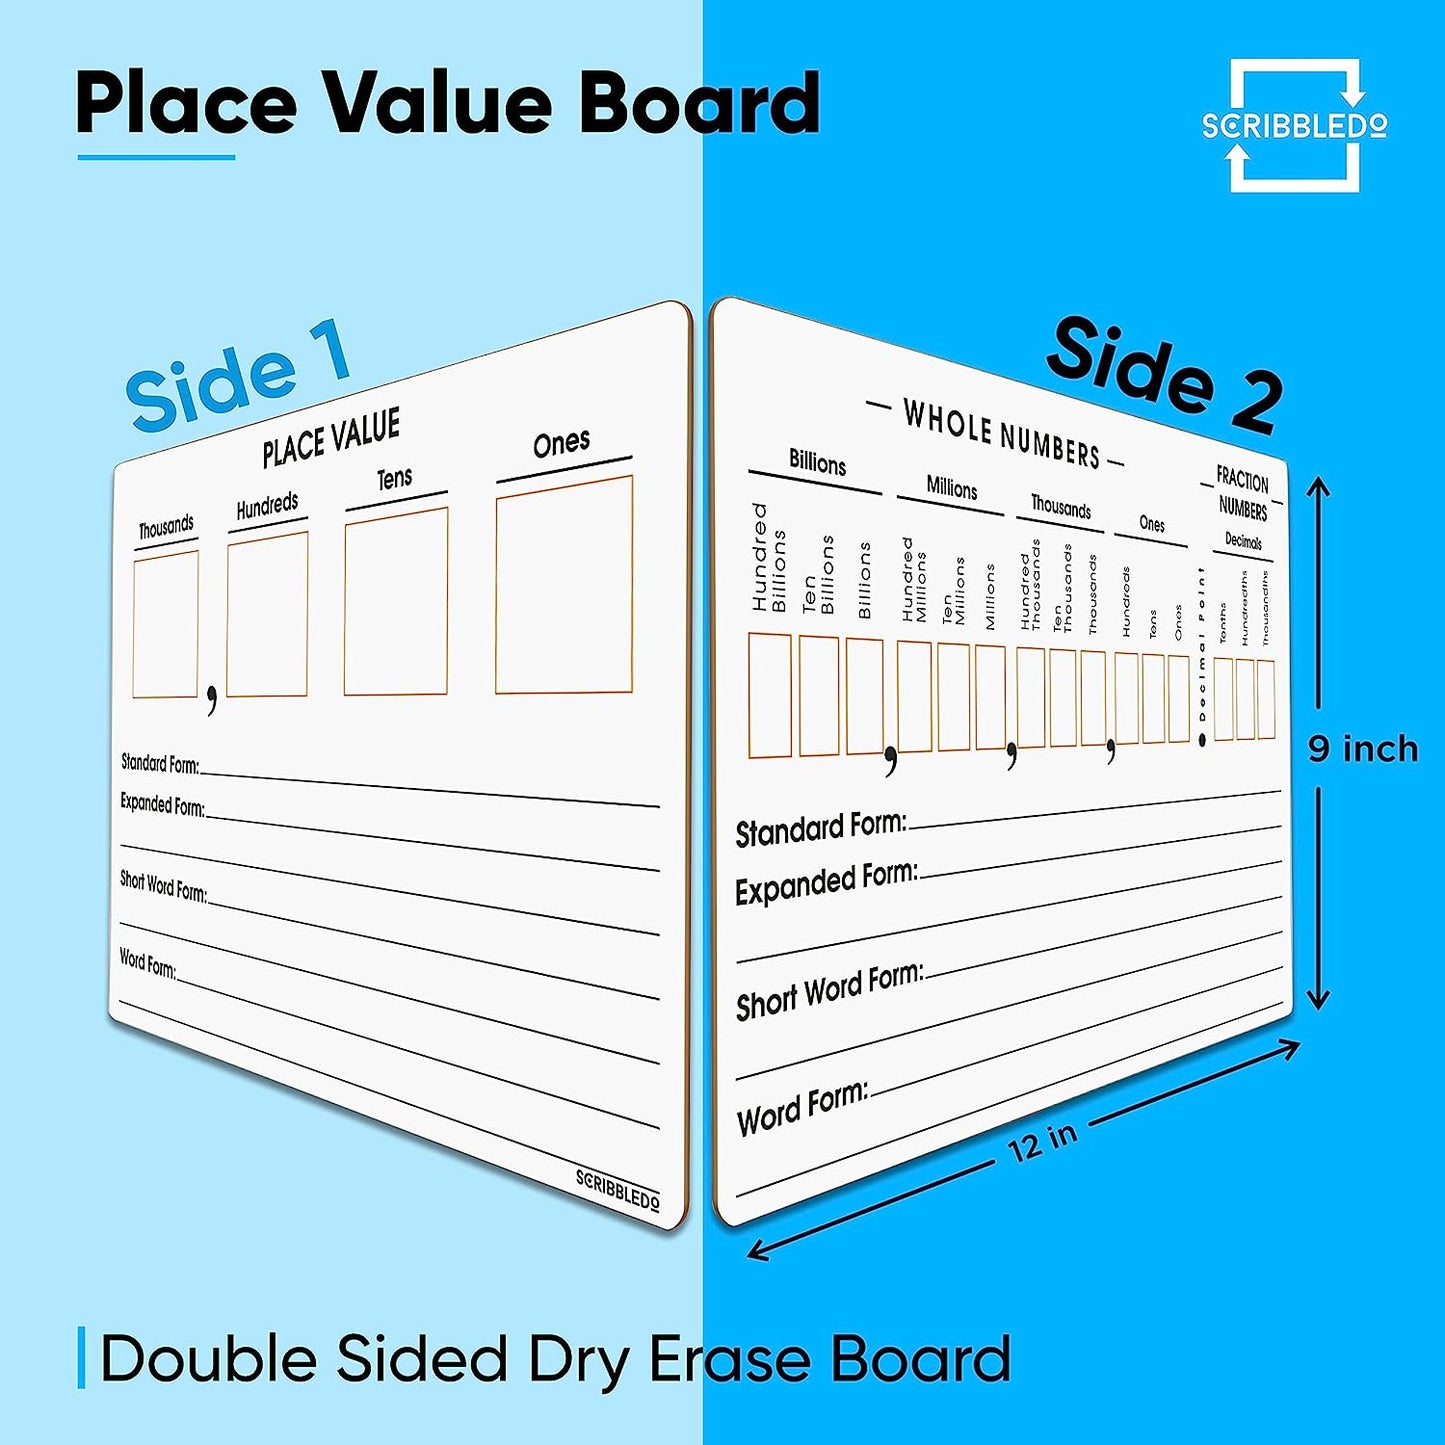 double side place value board 9x12